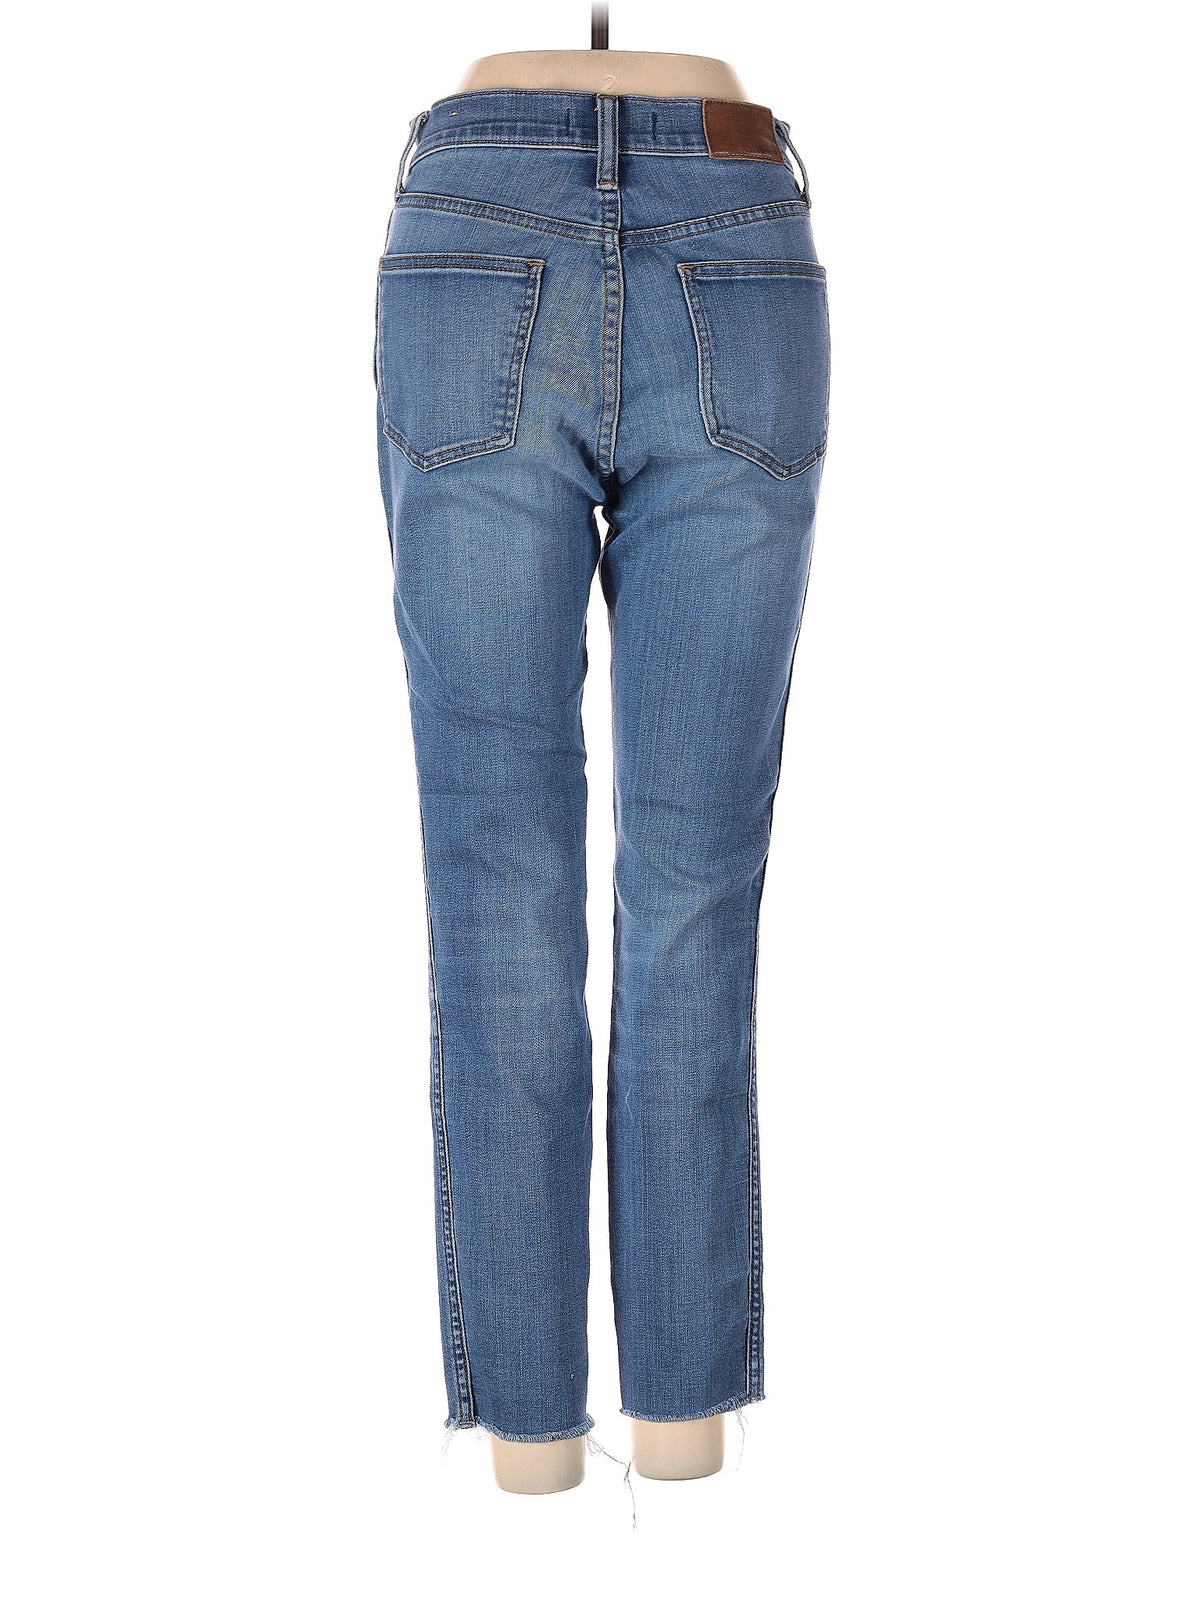 High-Rise Straight-leg 10" High-Rise Skinny Crop Jeans: Button-Front TENCEL&trade; Denim Edition in Light Wash waist size - 26